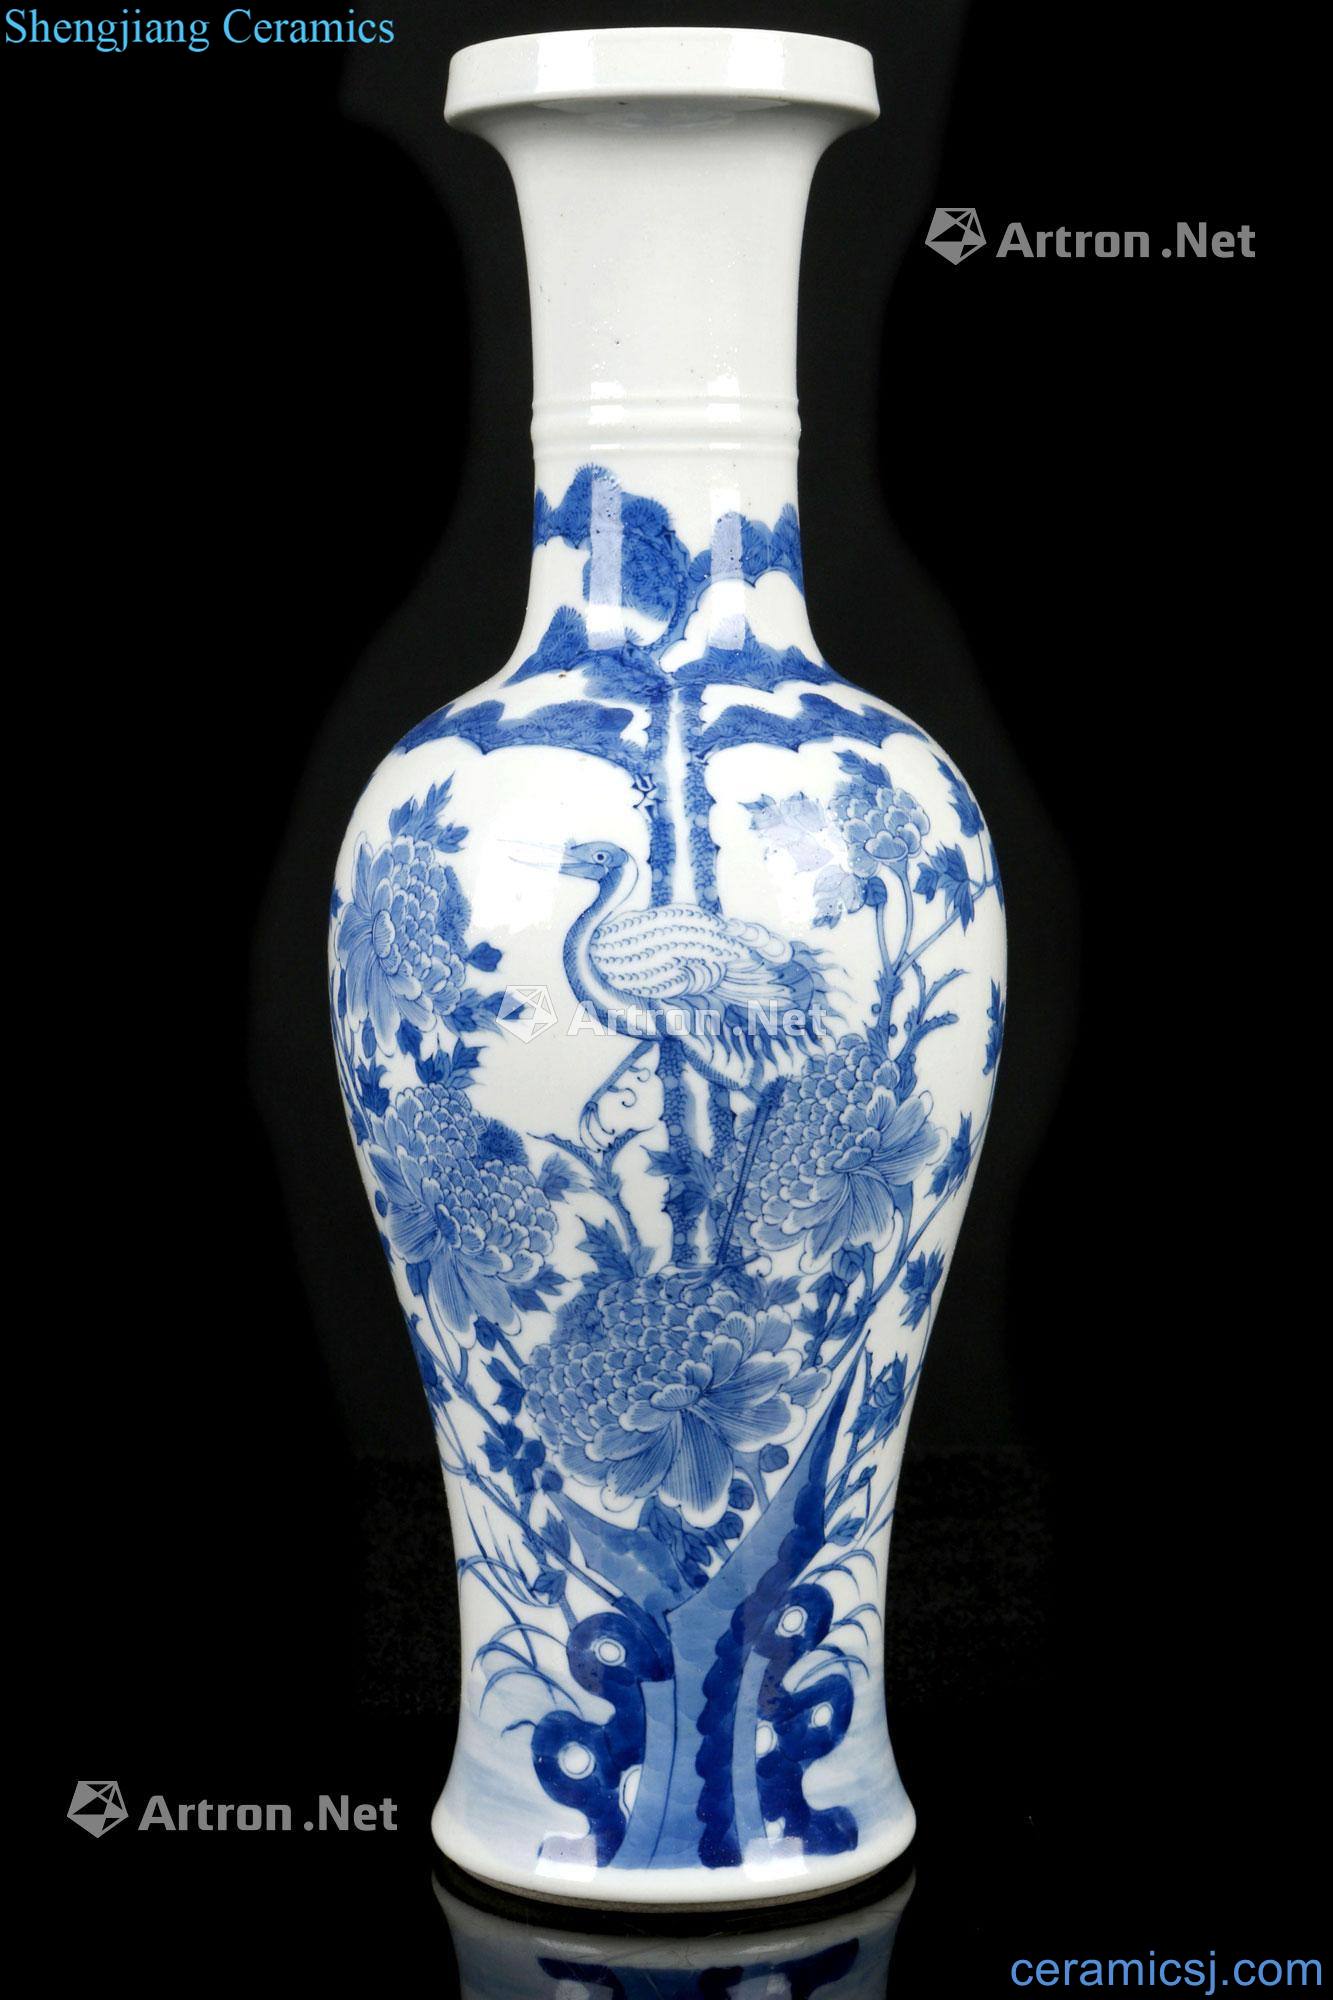 In the qing dynasty Blue and white peony bottle